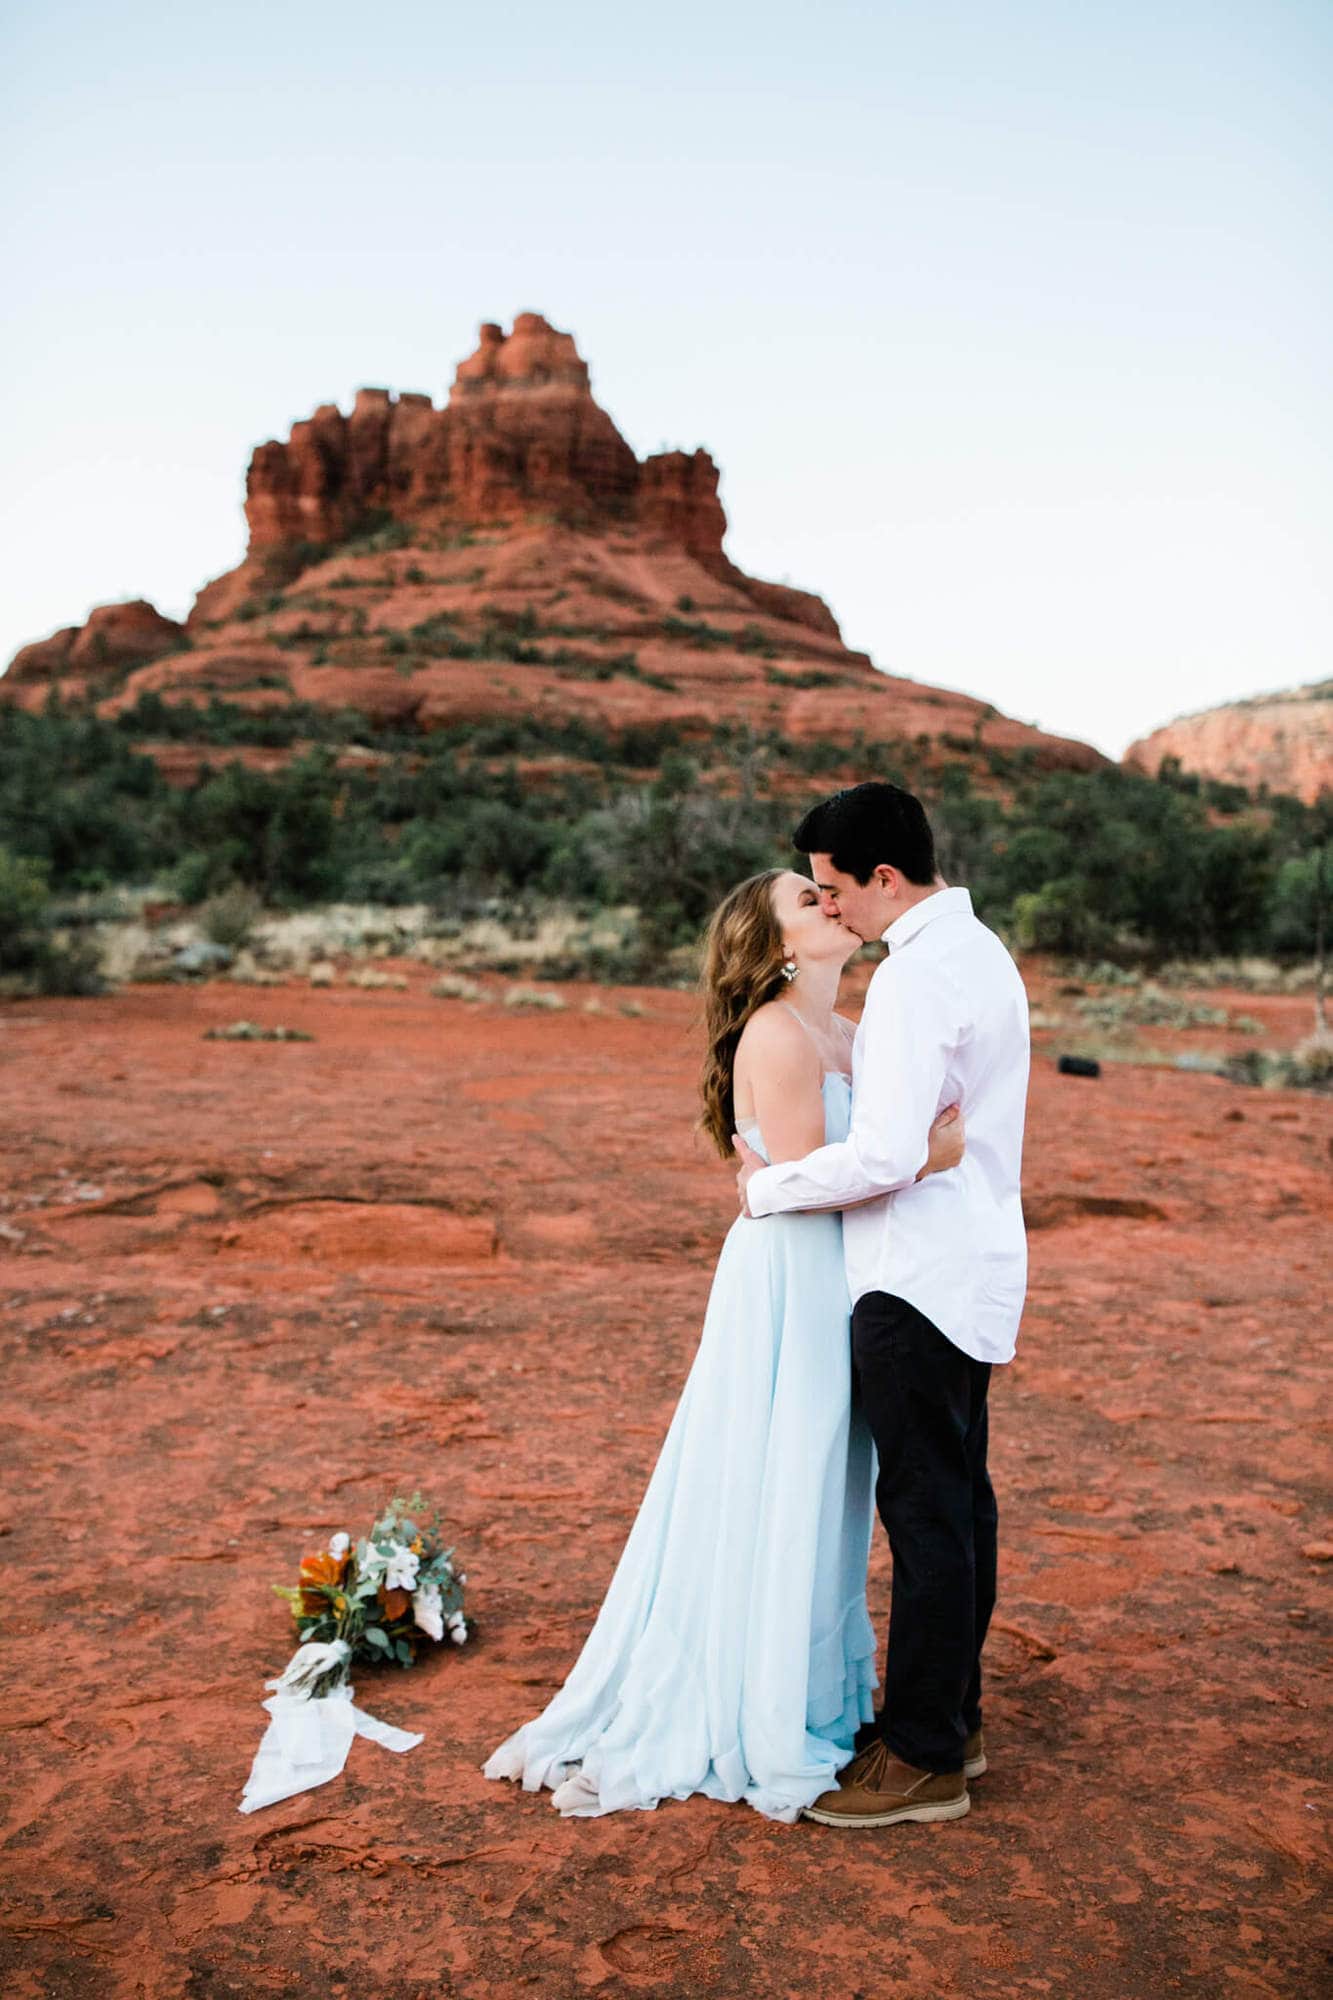 Having just eloped, the couple share their first kiss in front of Bell Rock in Sedona.